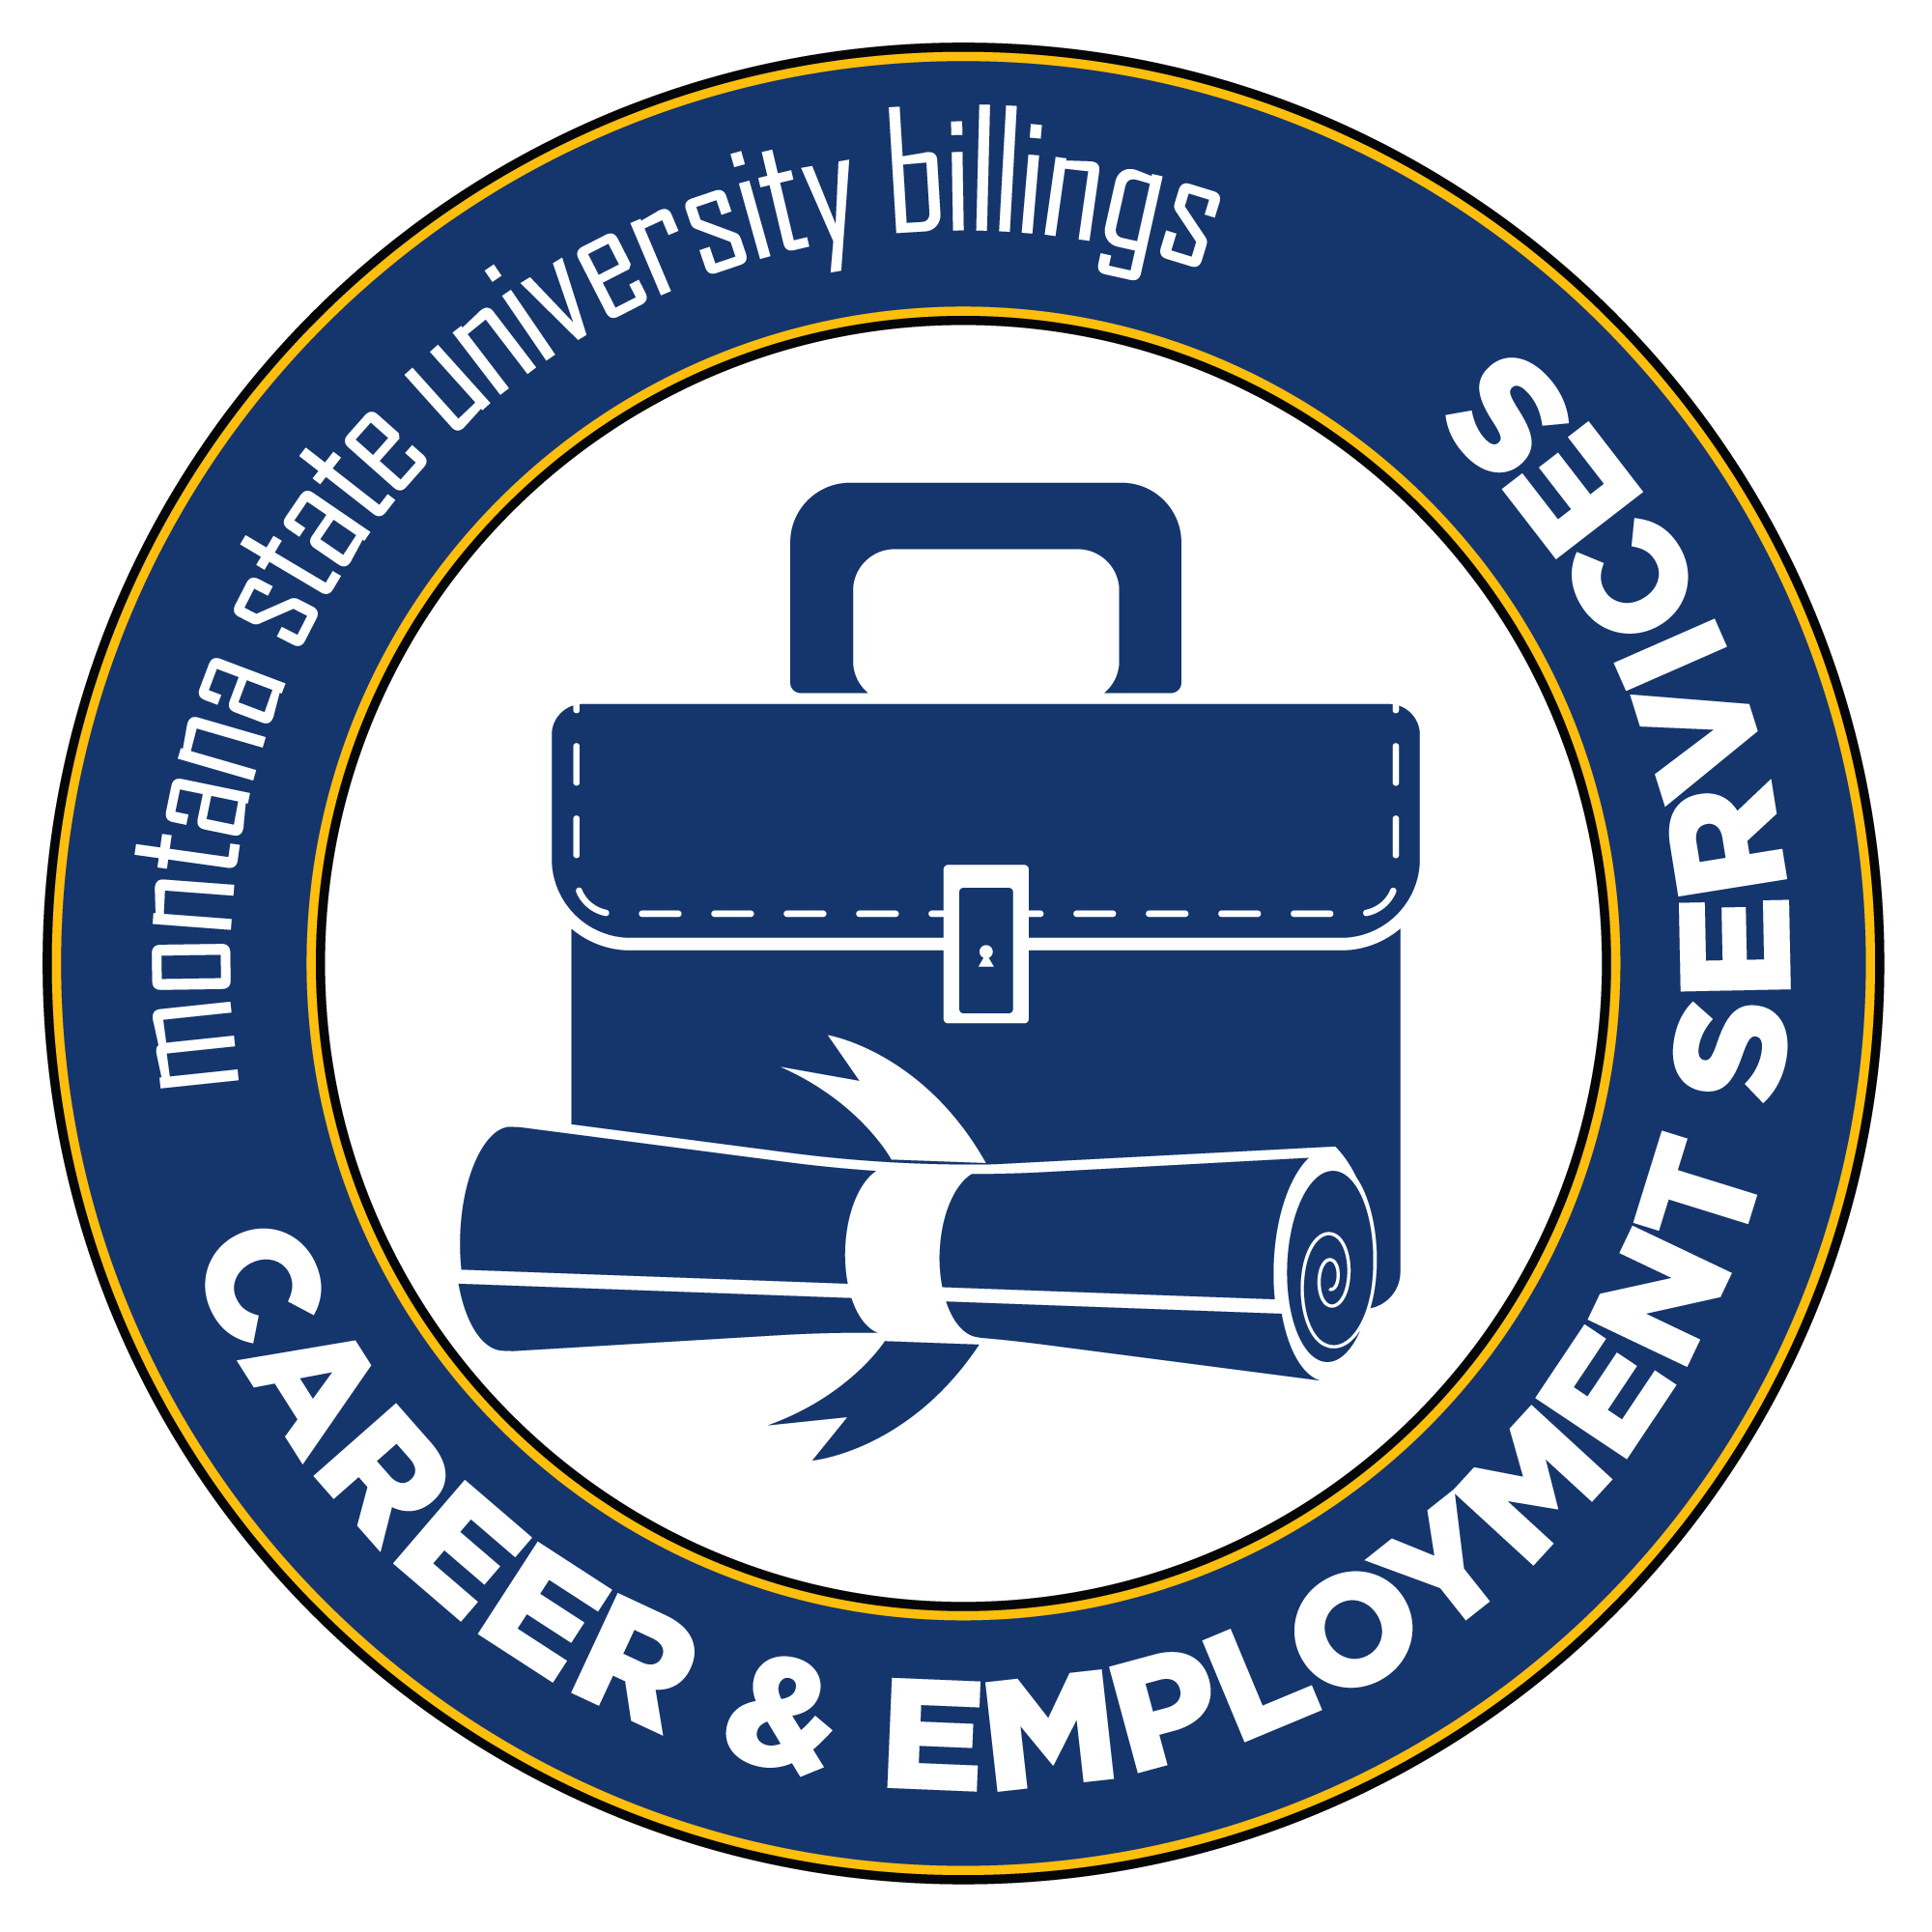 Career and employment services